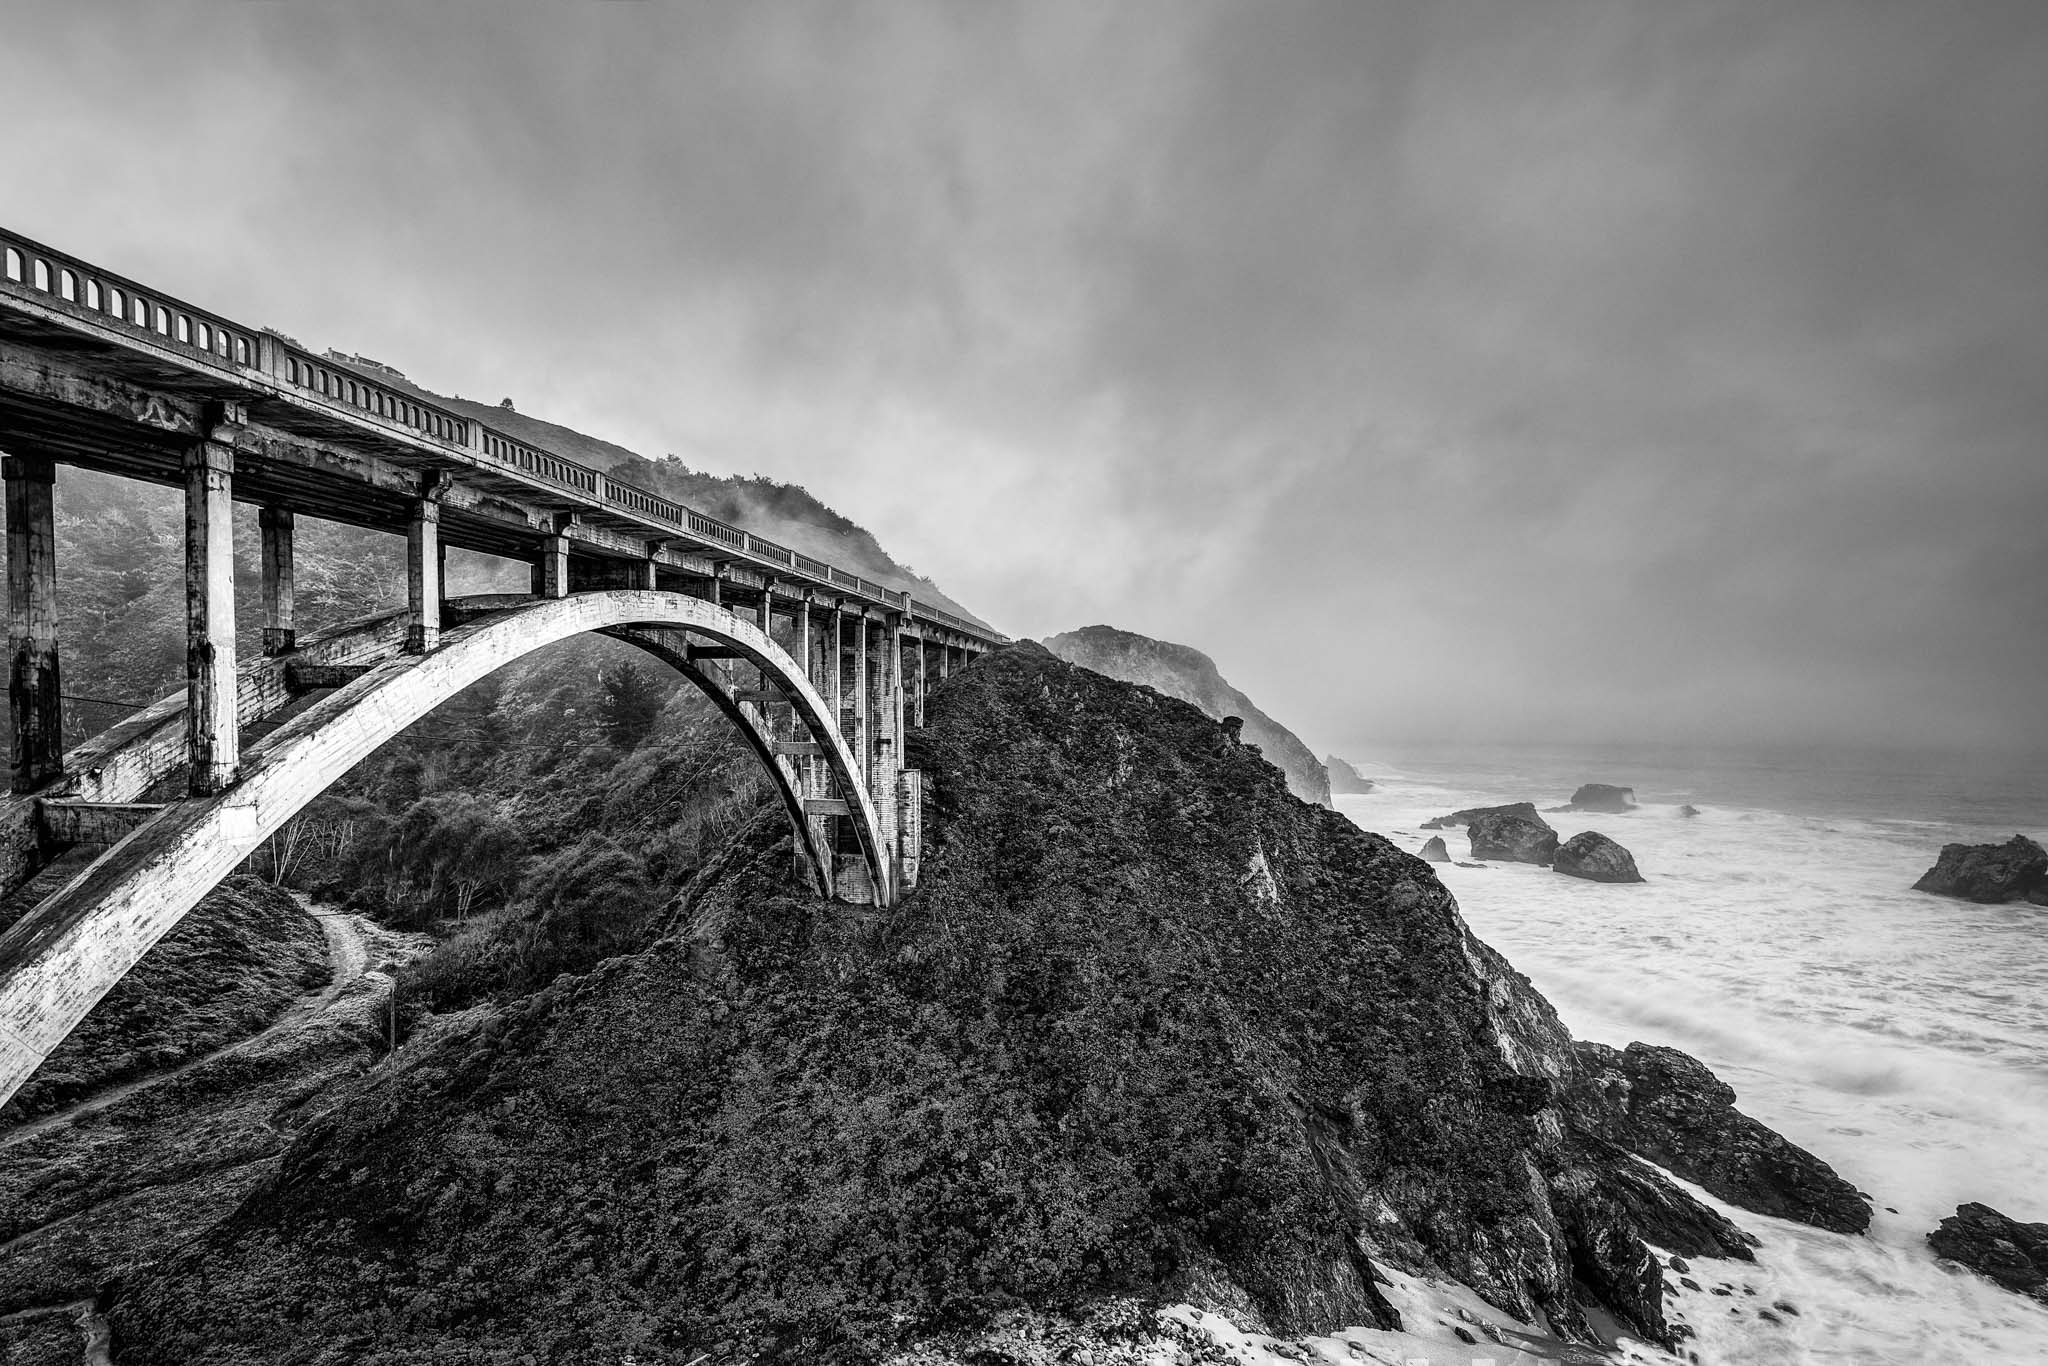 Big Sur California in Black and White | Andy's Travel Blog2048 x 1366